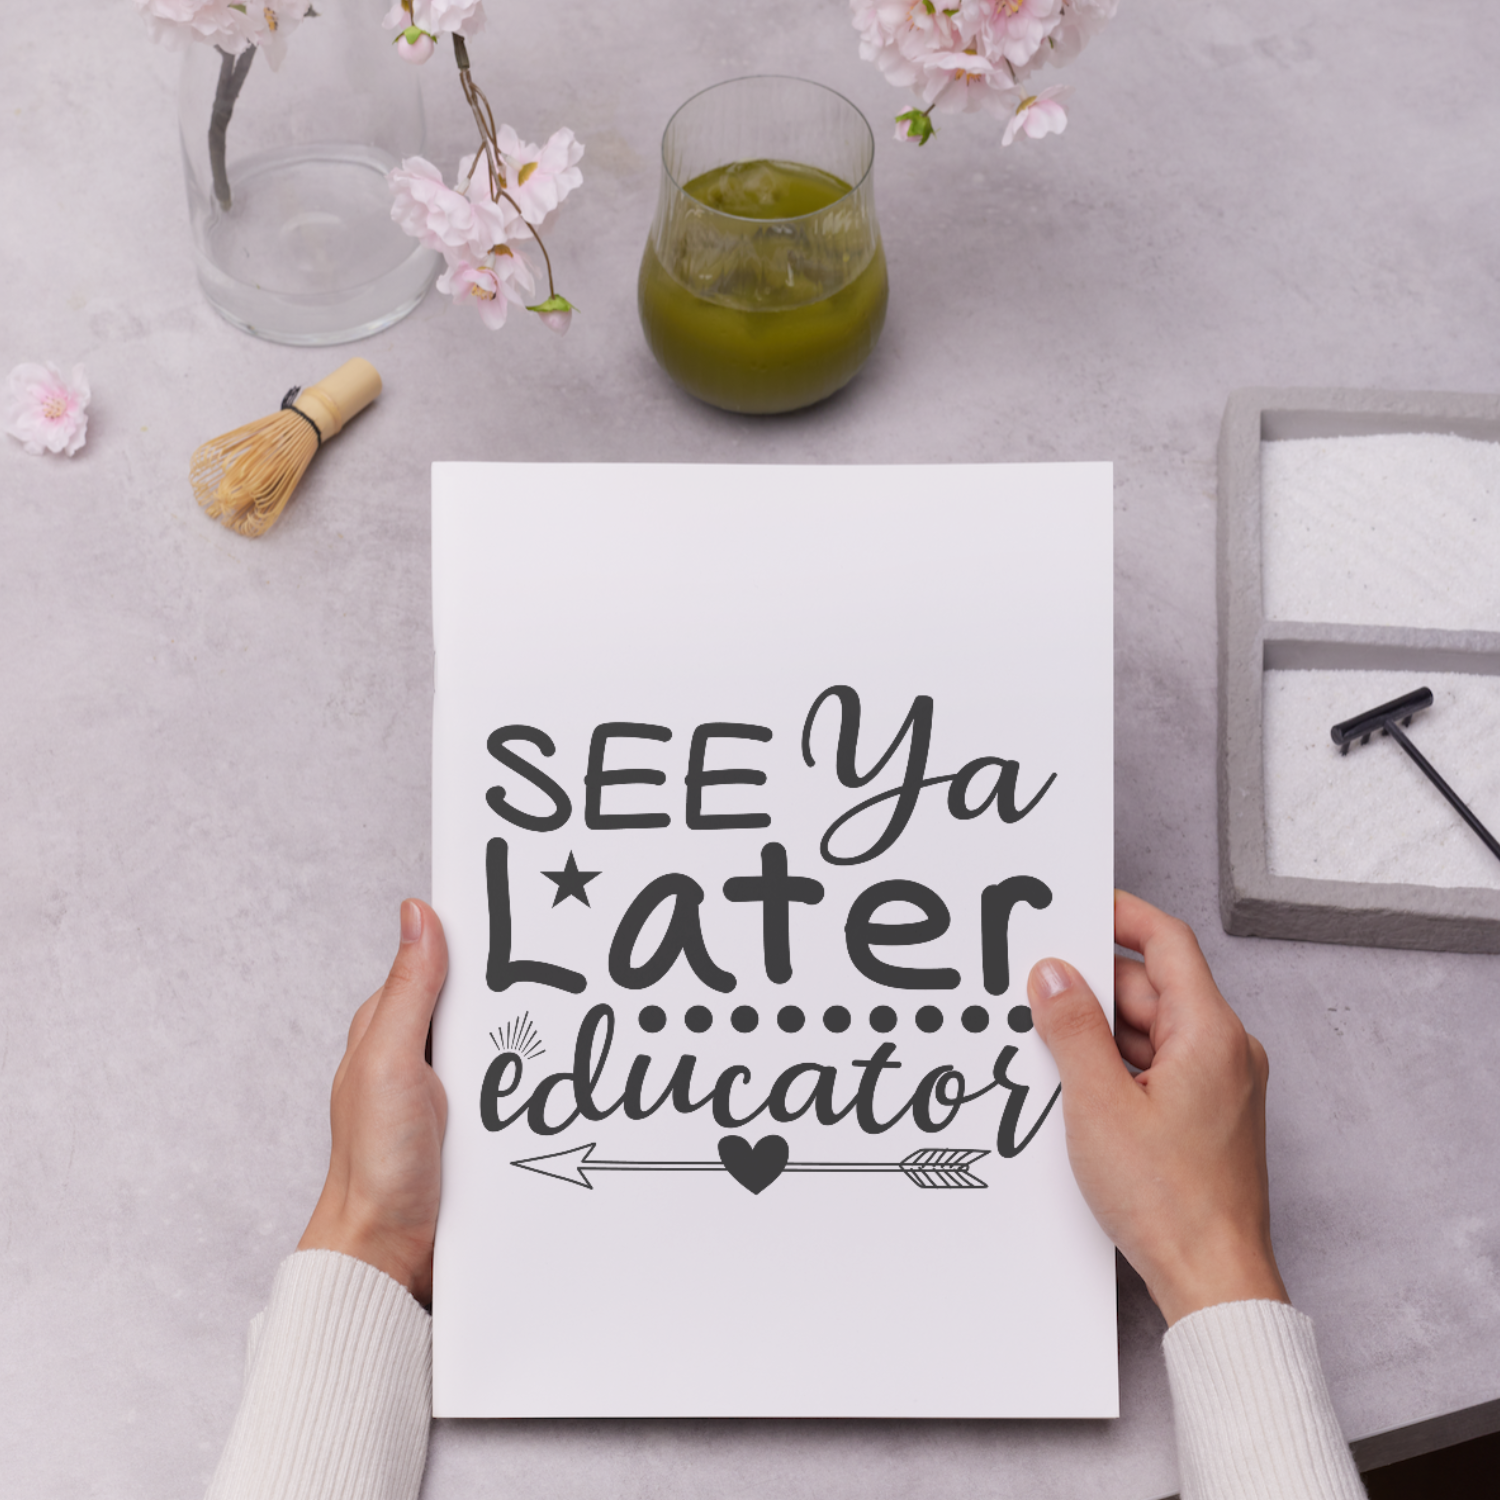 See Ya Later Educator 2 SVG | Digital Download | Cut File | SVG - Only The Sweet Stuff